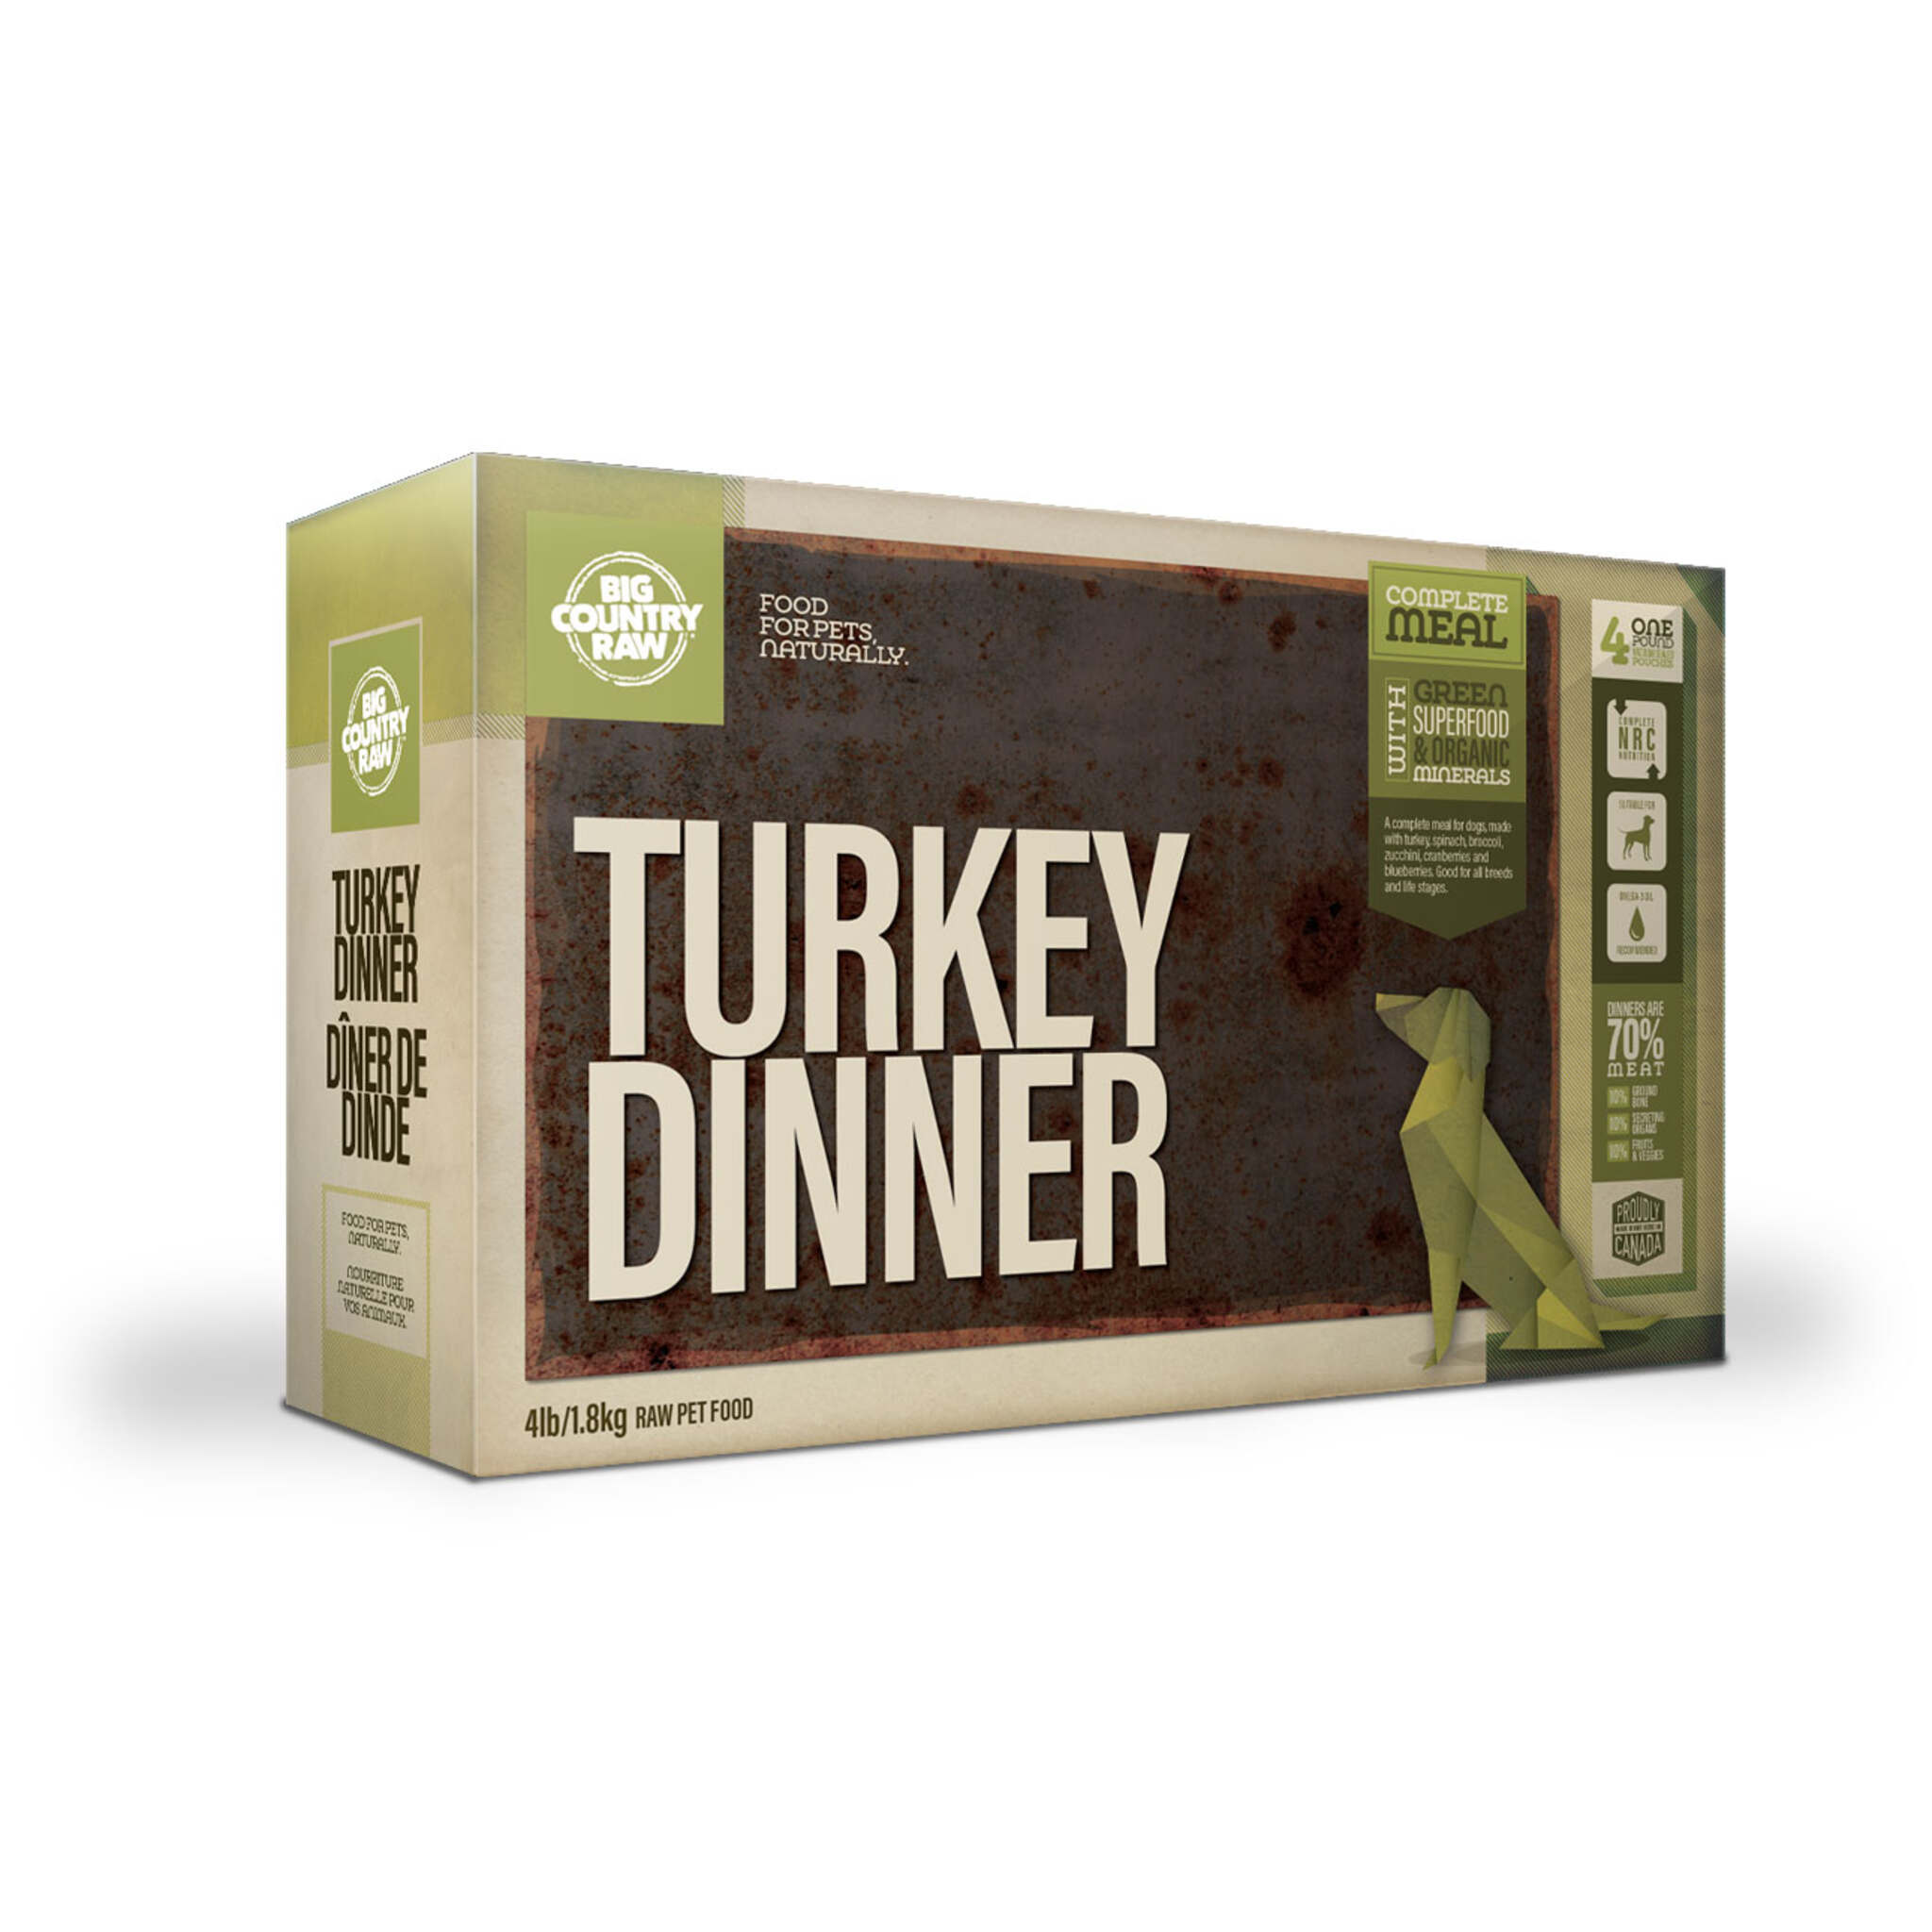 A carton of Big Country Raw dog food, Turkey Dinner recipe, 4 lb (contains four 1 lb patties), requires freezing.